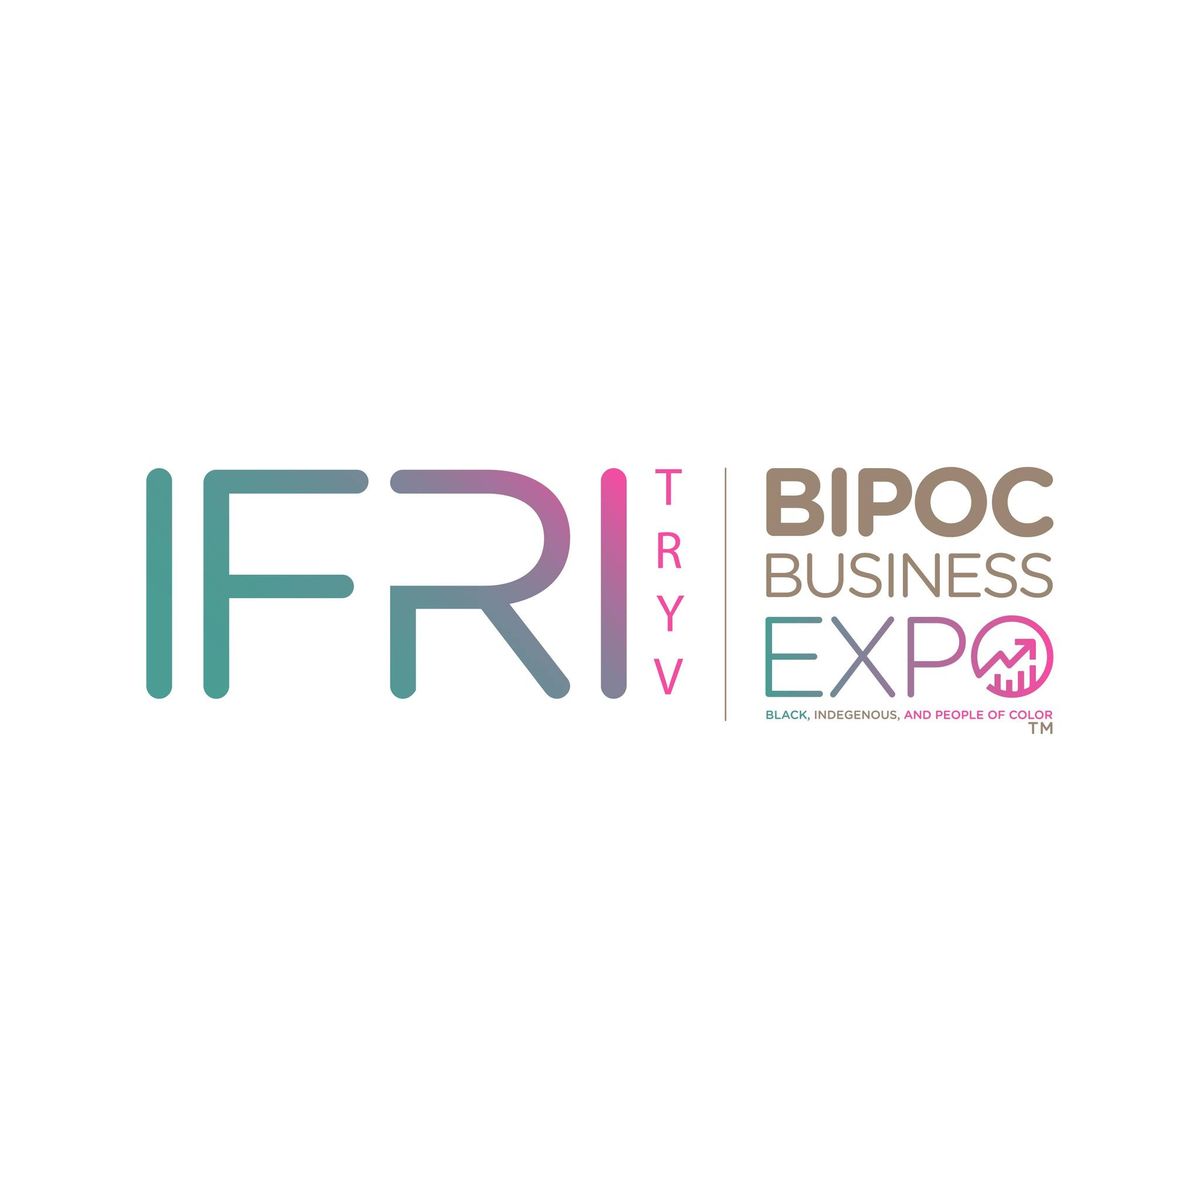 3rd Annual BIPOC Business Expo